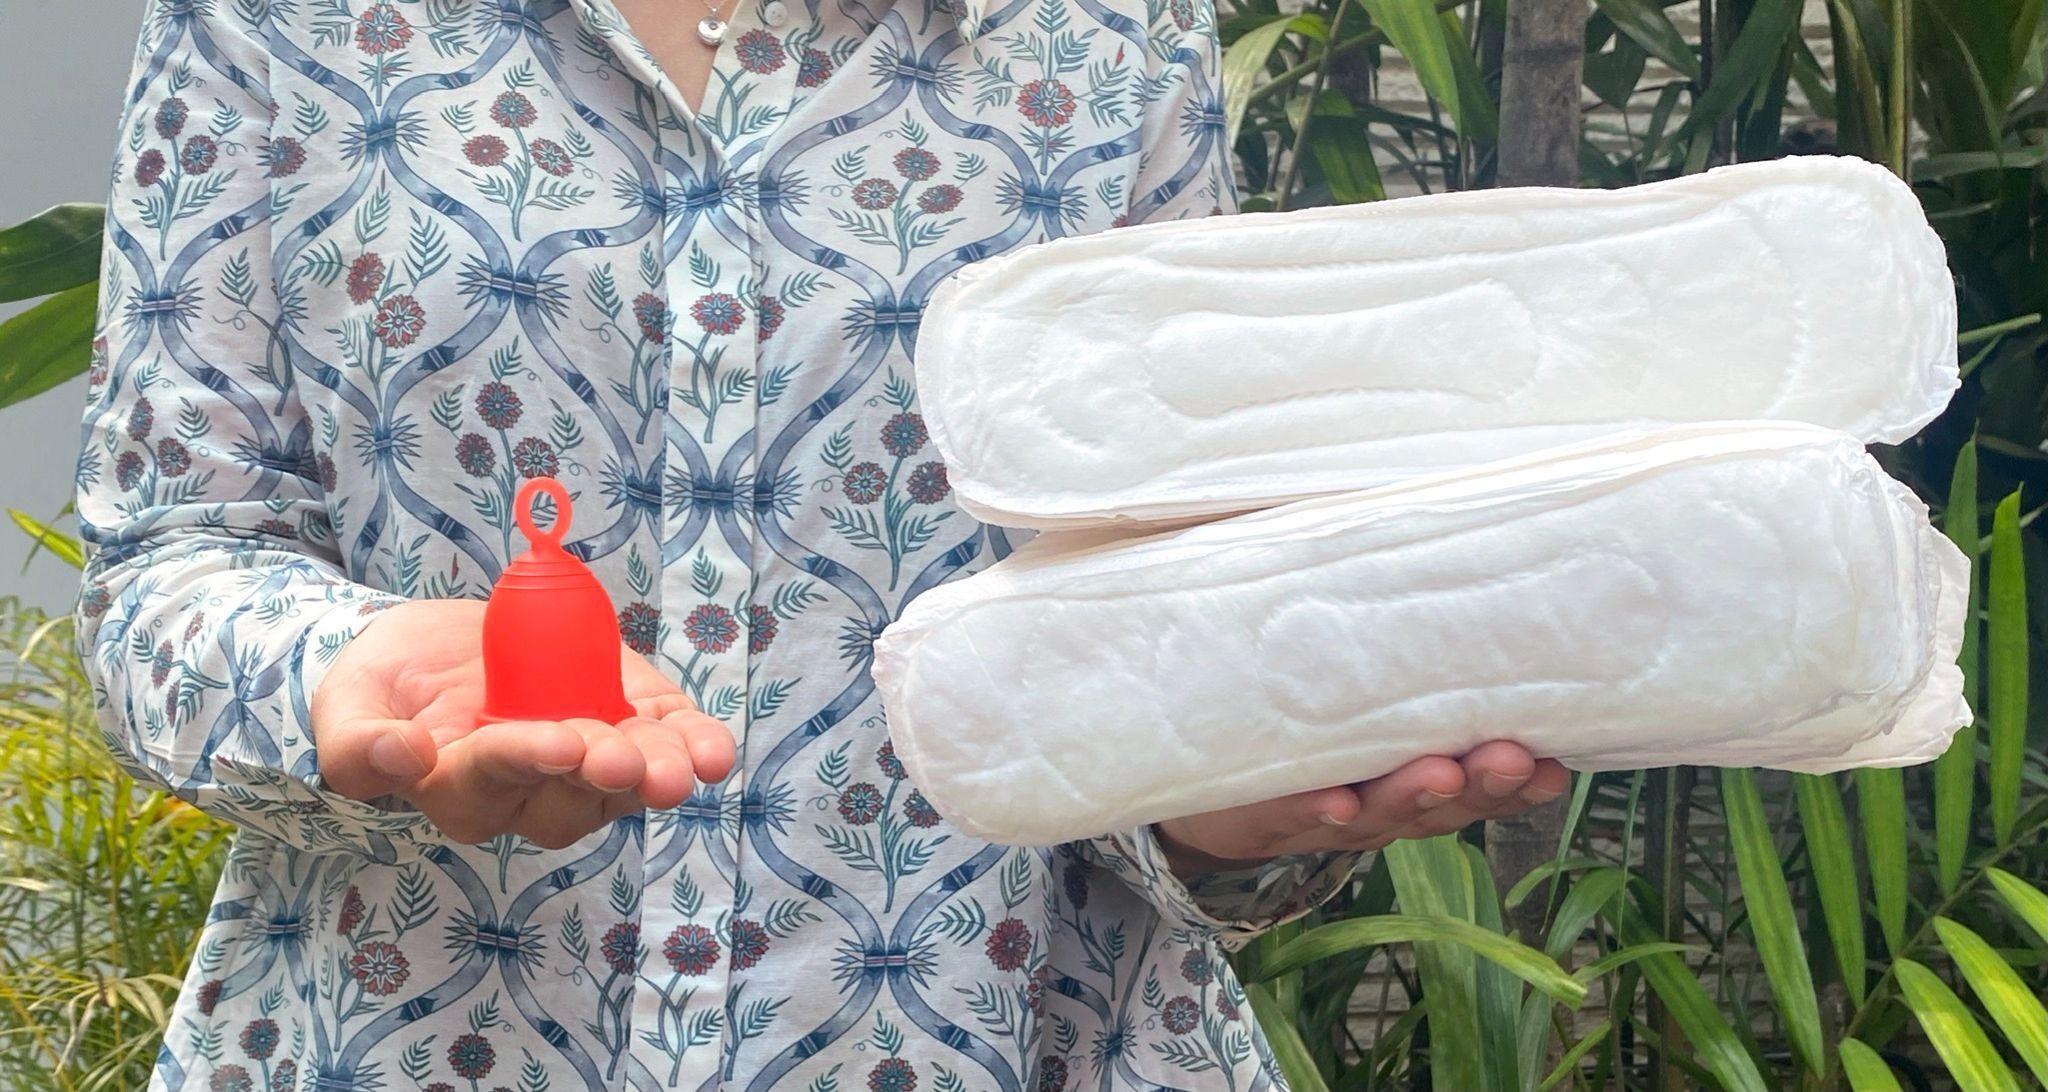 Woman holding Asan menstrual cup in one hand and bunch of sanitary pads in other. 